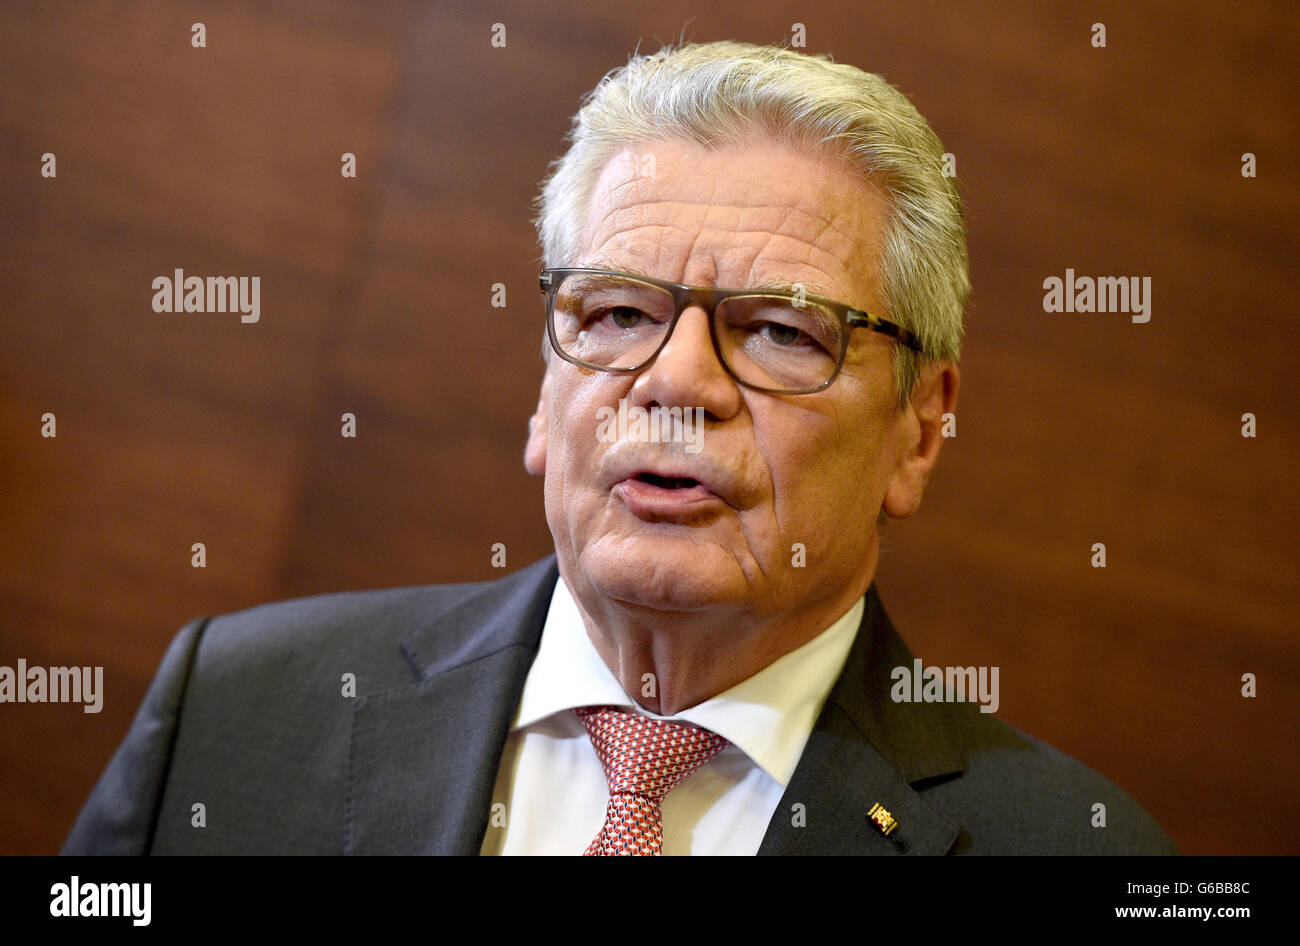 Sofia, Bulgaria. 24th June, 2016. German President Joachim Gauck delivers a statement after Britain voted to leave the European Union (EU) in a referendum held on 23 June, during his visit to Sofia, Bulgaria, 24 June 2016. Gauck expressed his concern after the Brexit referendum. 'Many good Europeans are sad today, ' Gauck said at an event in Sofia on 24 June. Photo: RAINER JENSEN/dpa/Alamy Live News Stock Photo